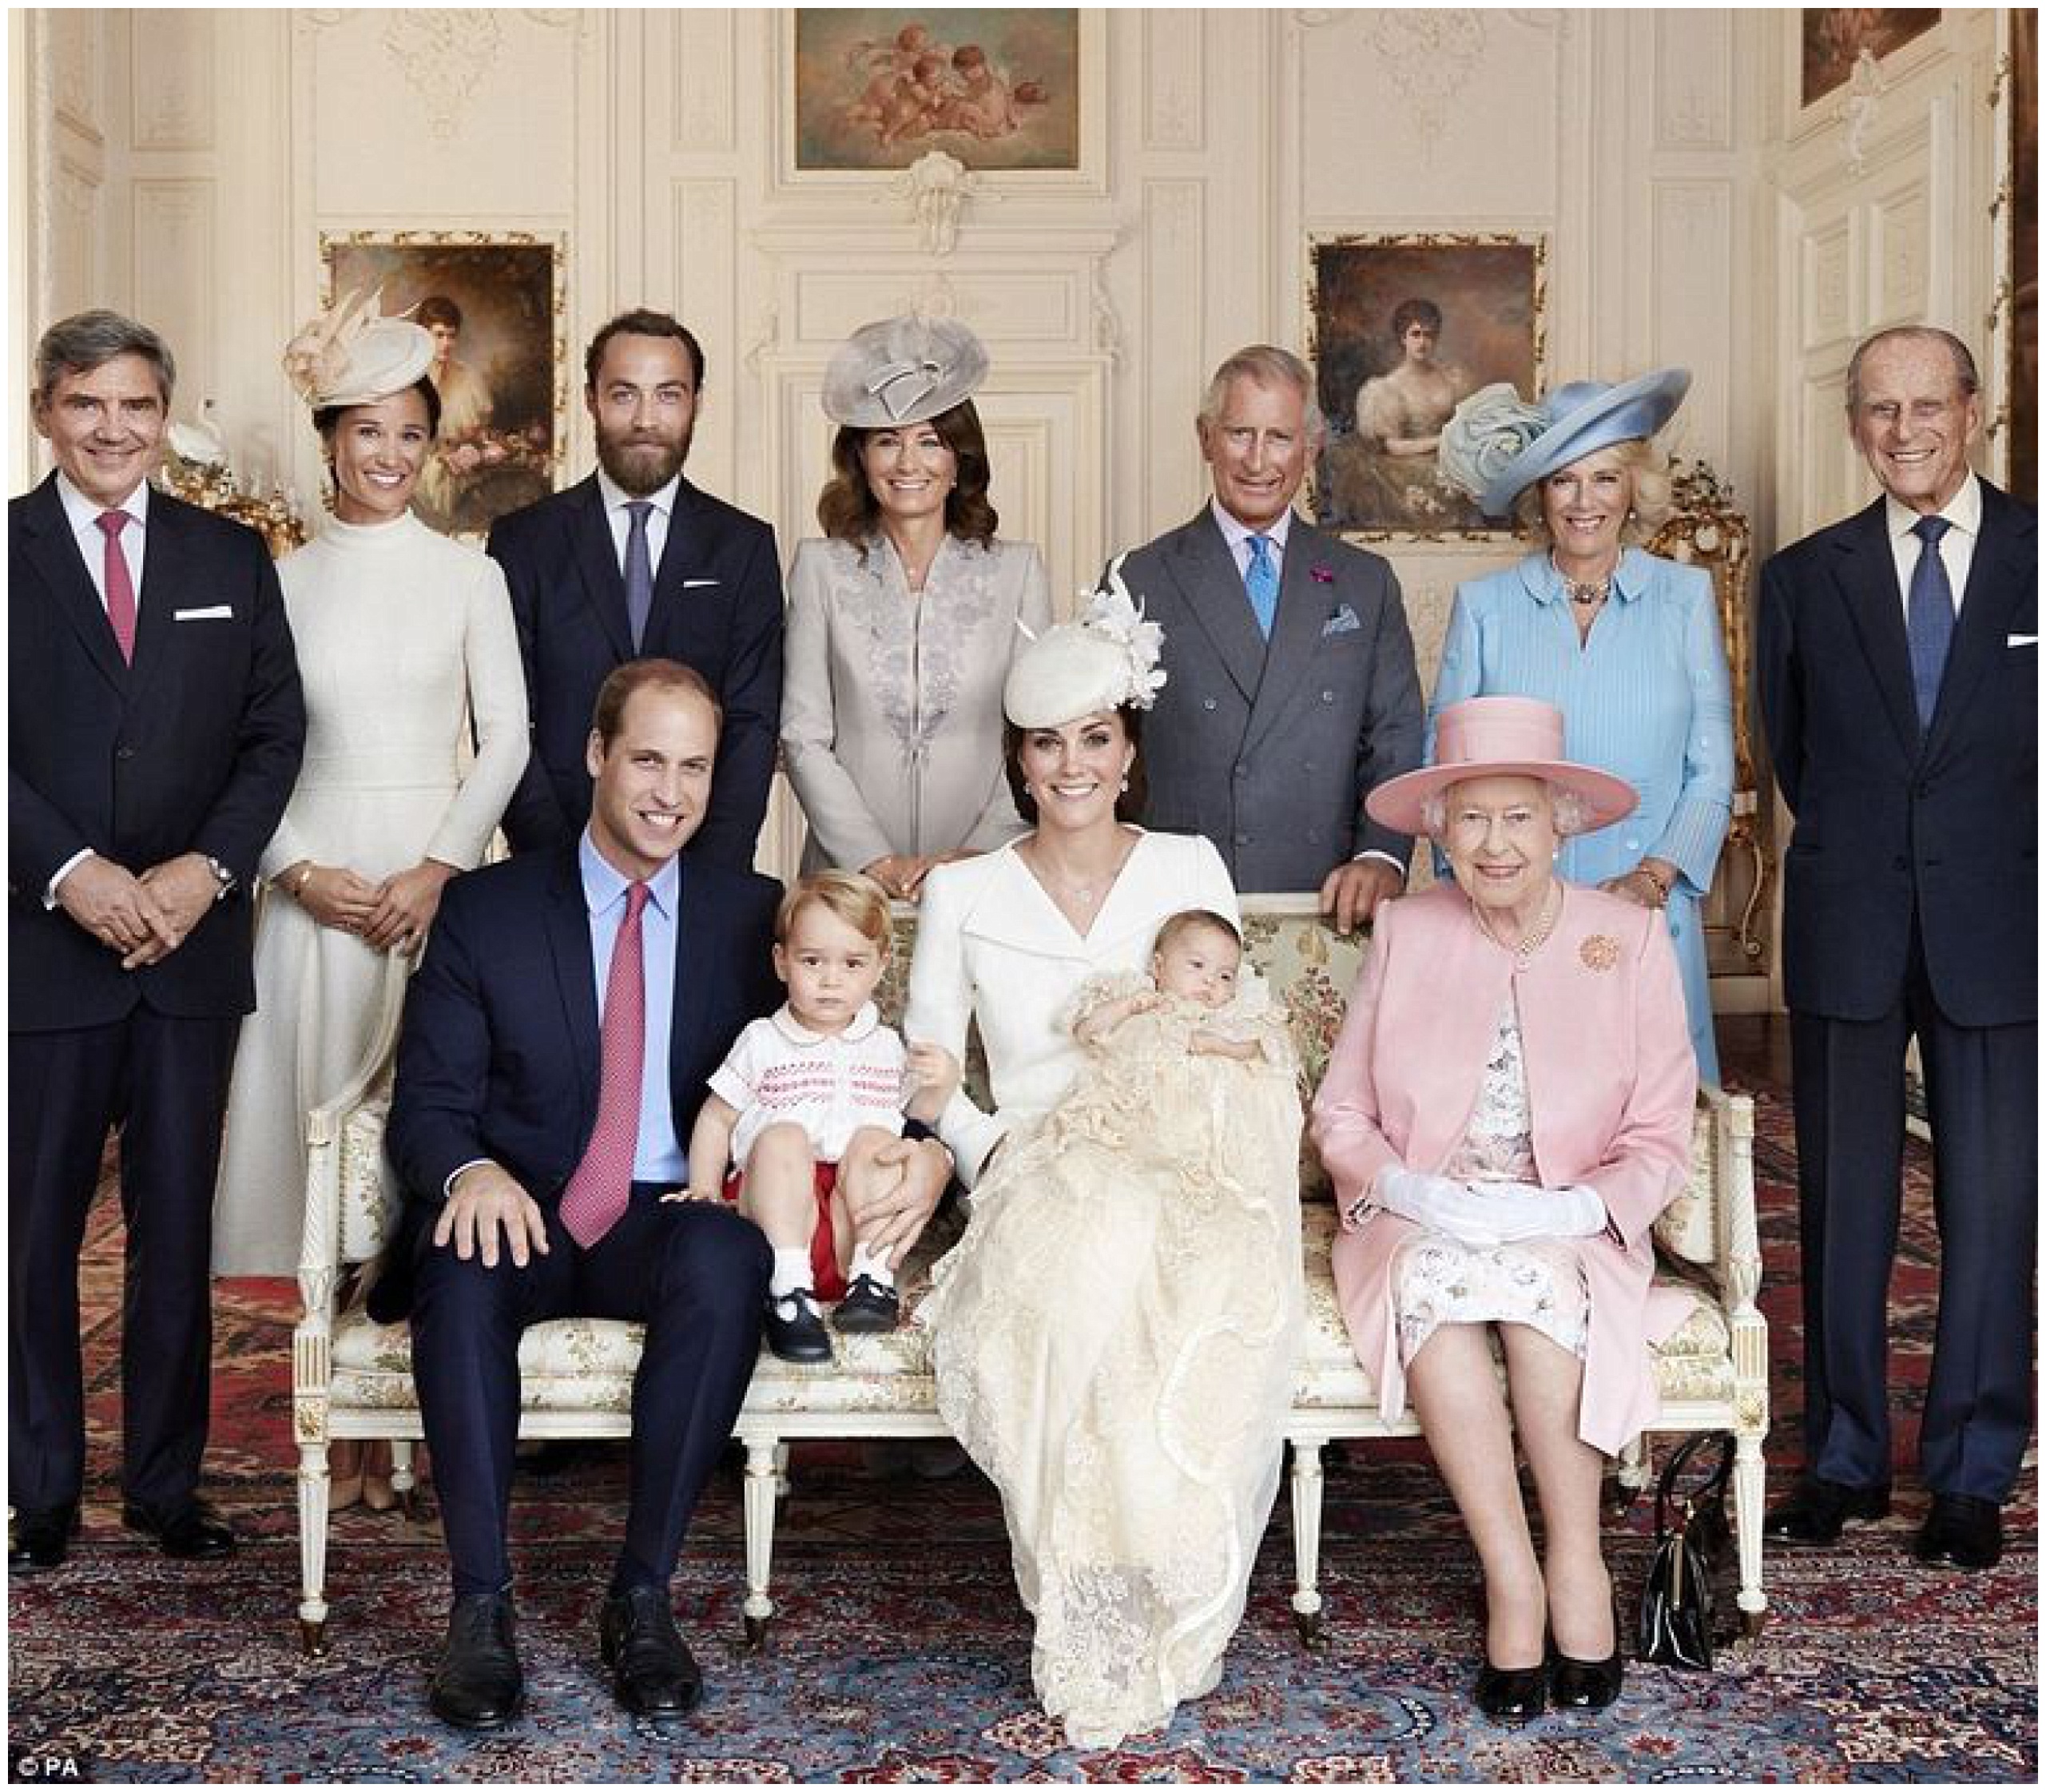 Christening in Style: Dressing for a family occasion